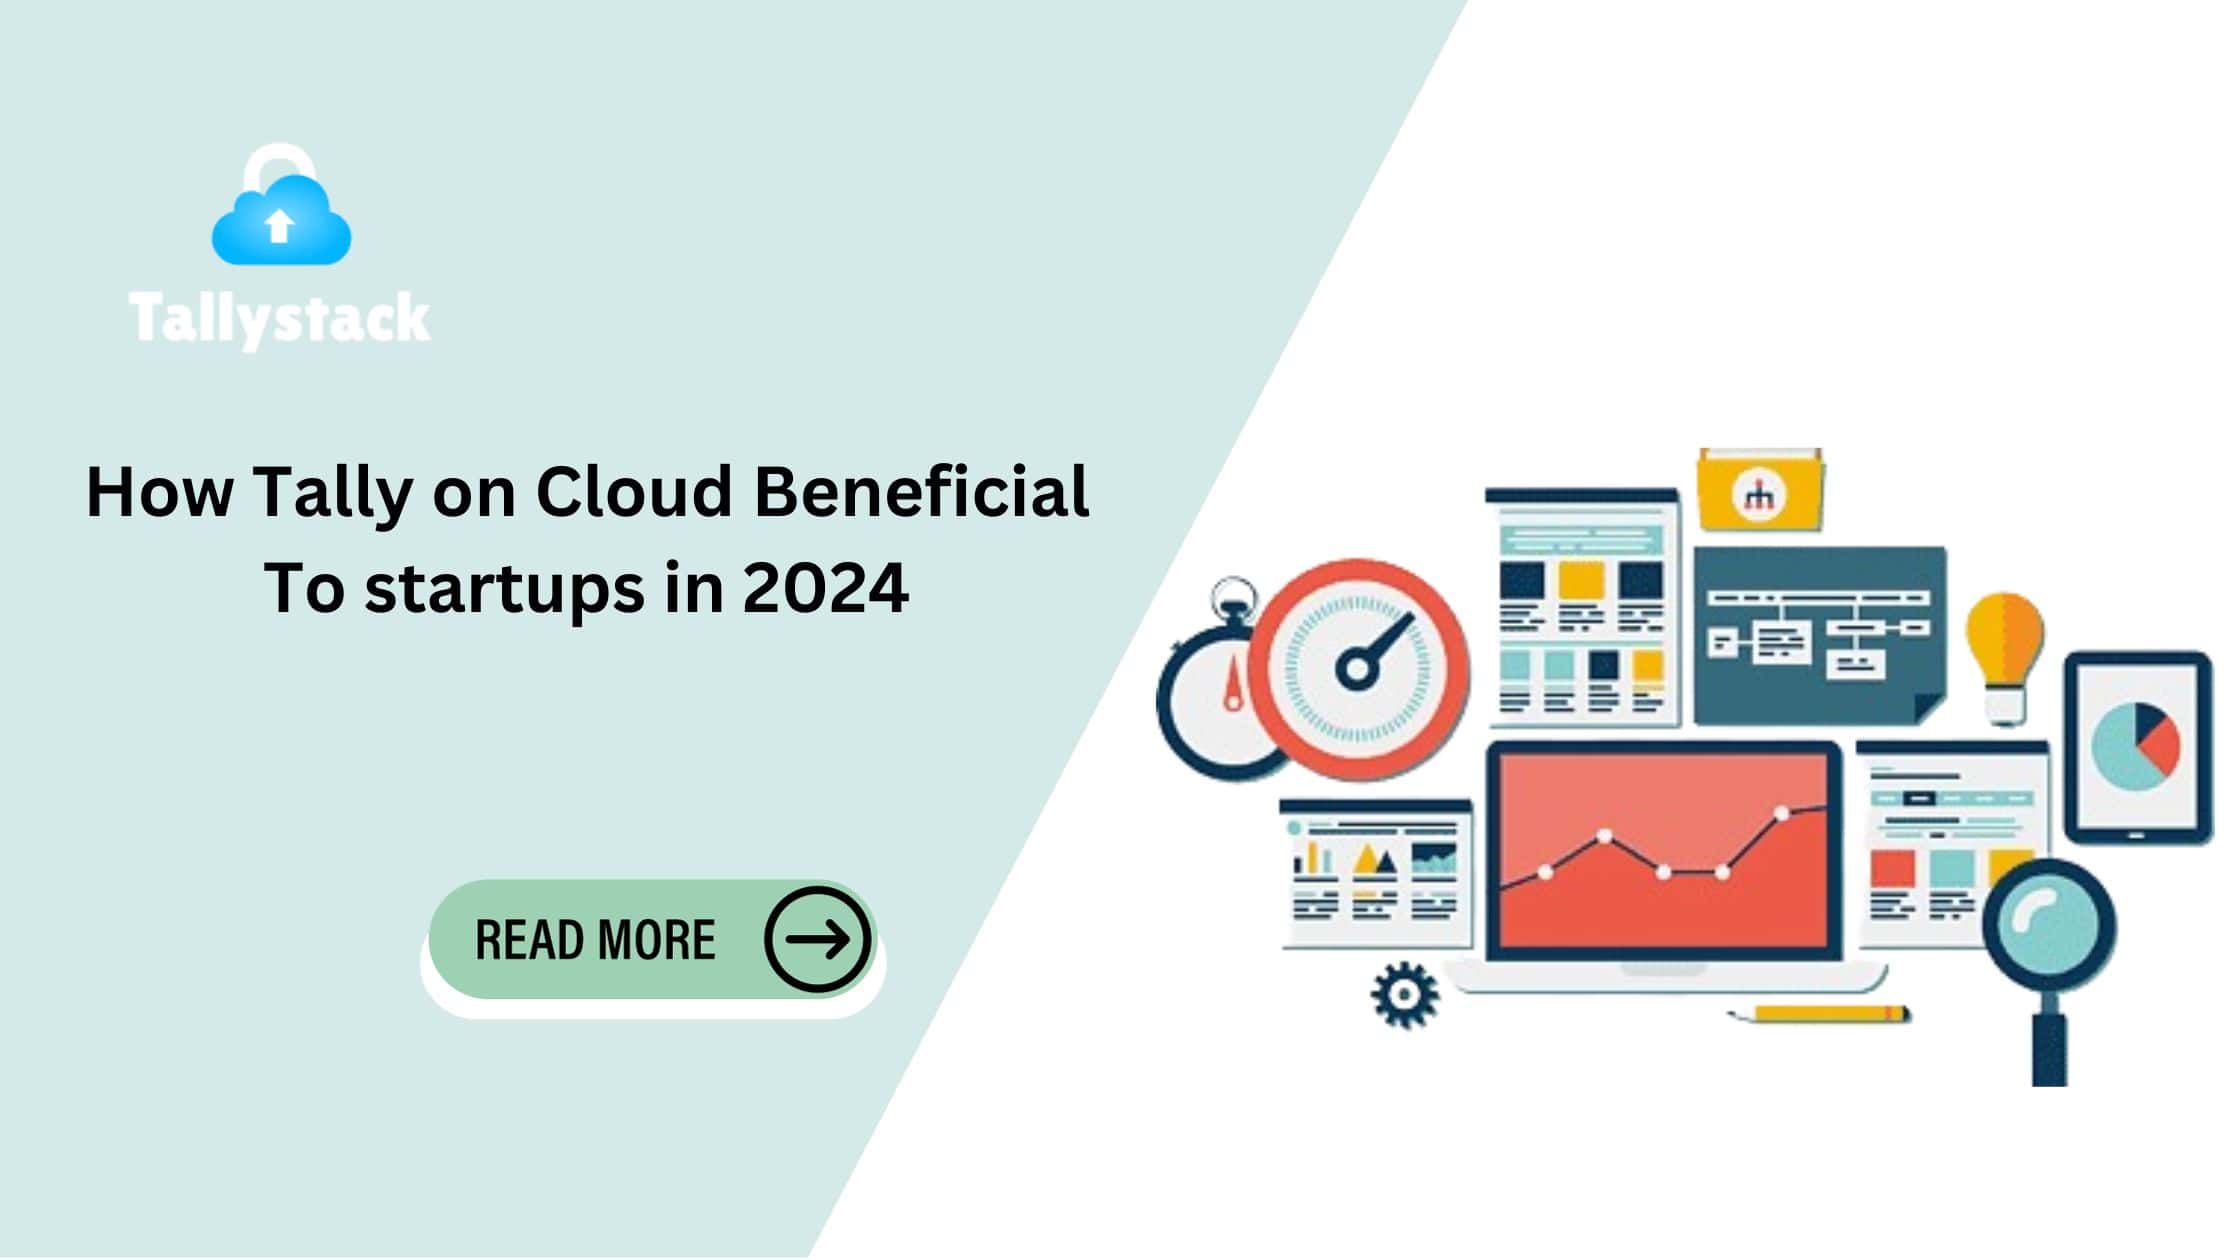 How Tally on Cloud Benefical To Startups In 2024